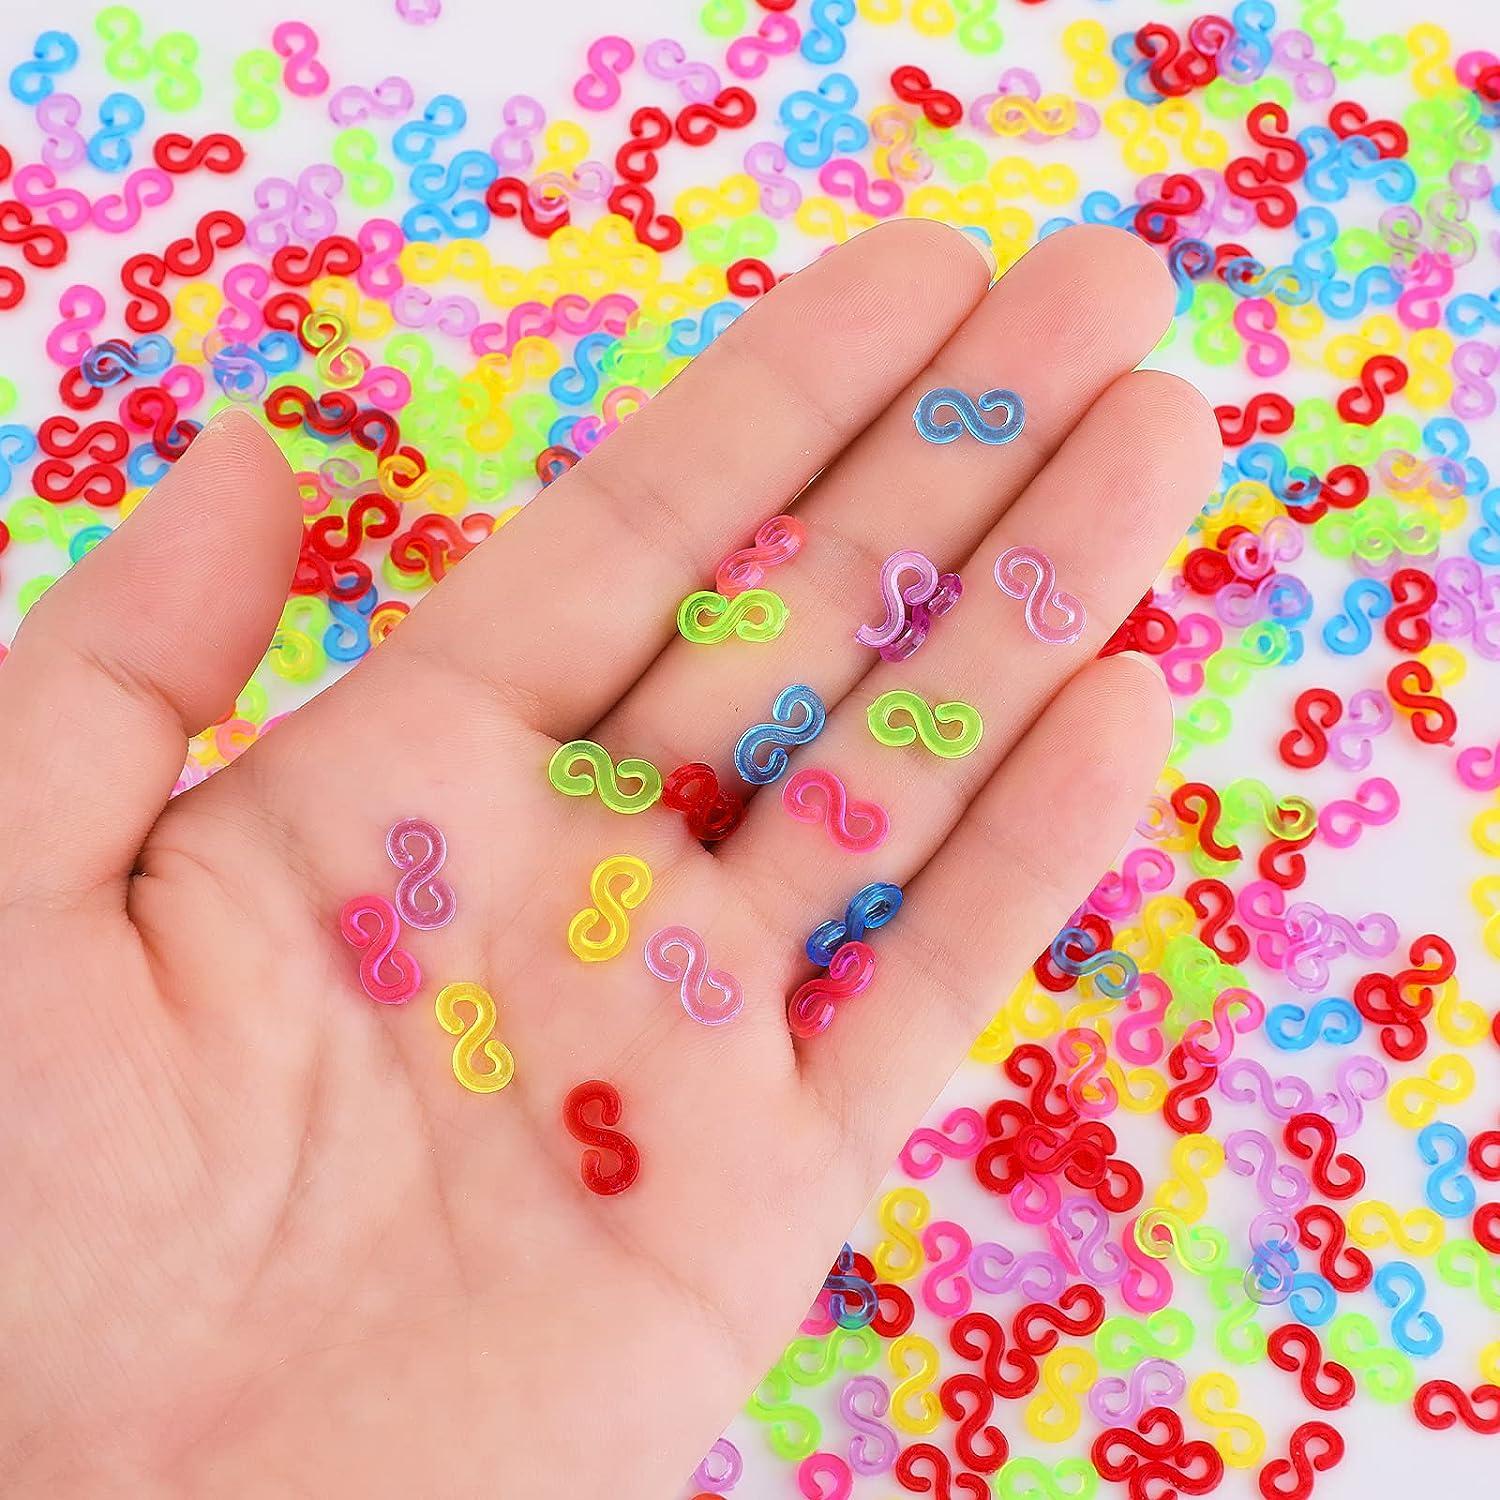 Lusofie 500Pcs Rubber Band Clips Plastic S Clips Colorful Rubber Band  Connectors Clip for Loom Bands Bracelet DIY Craft Making